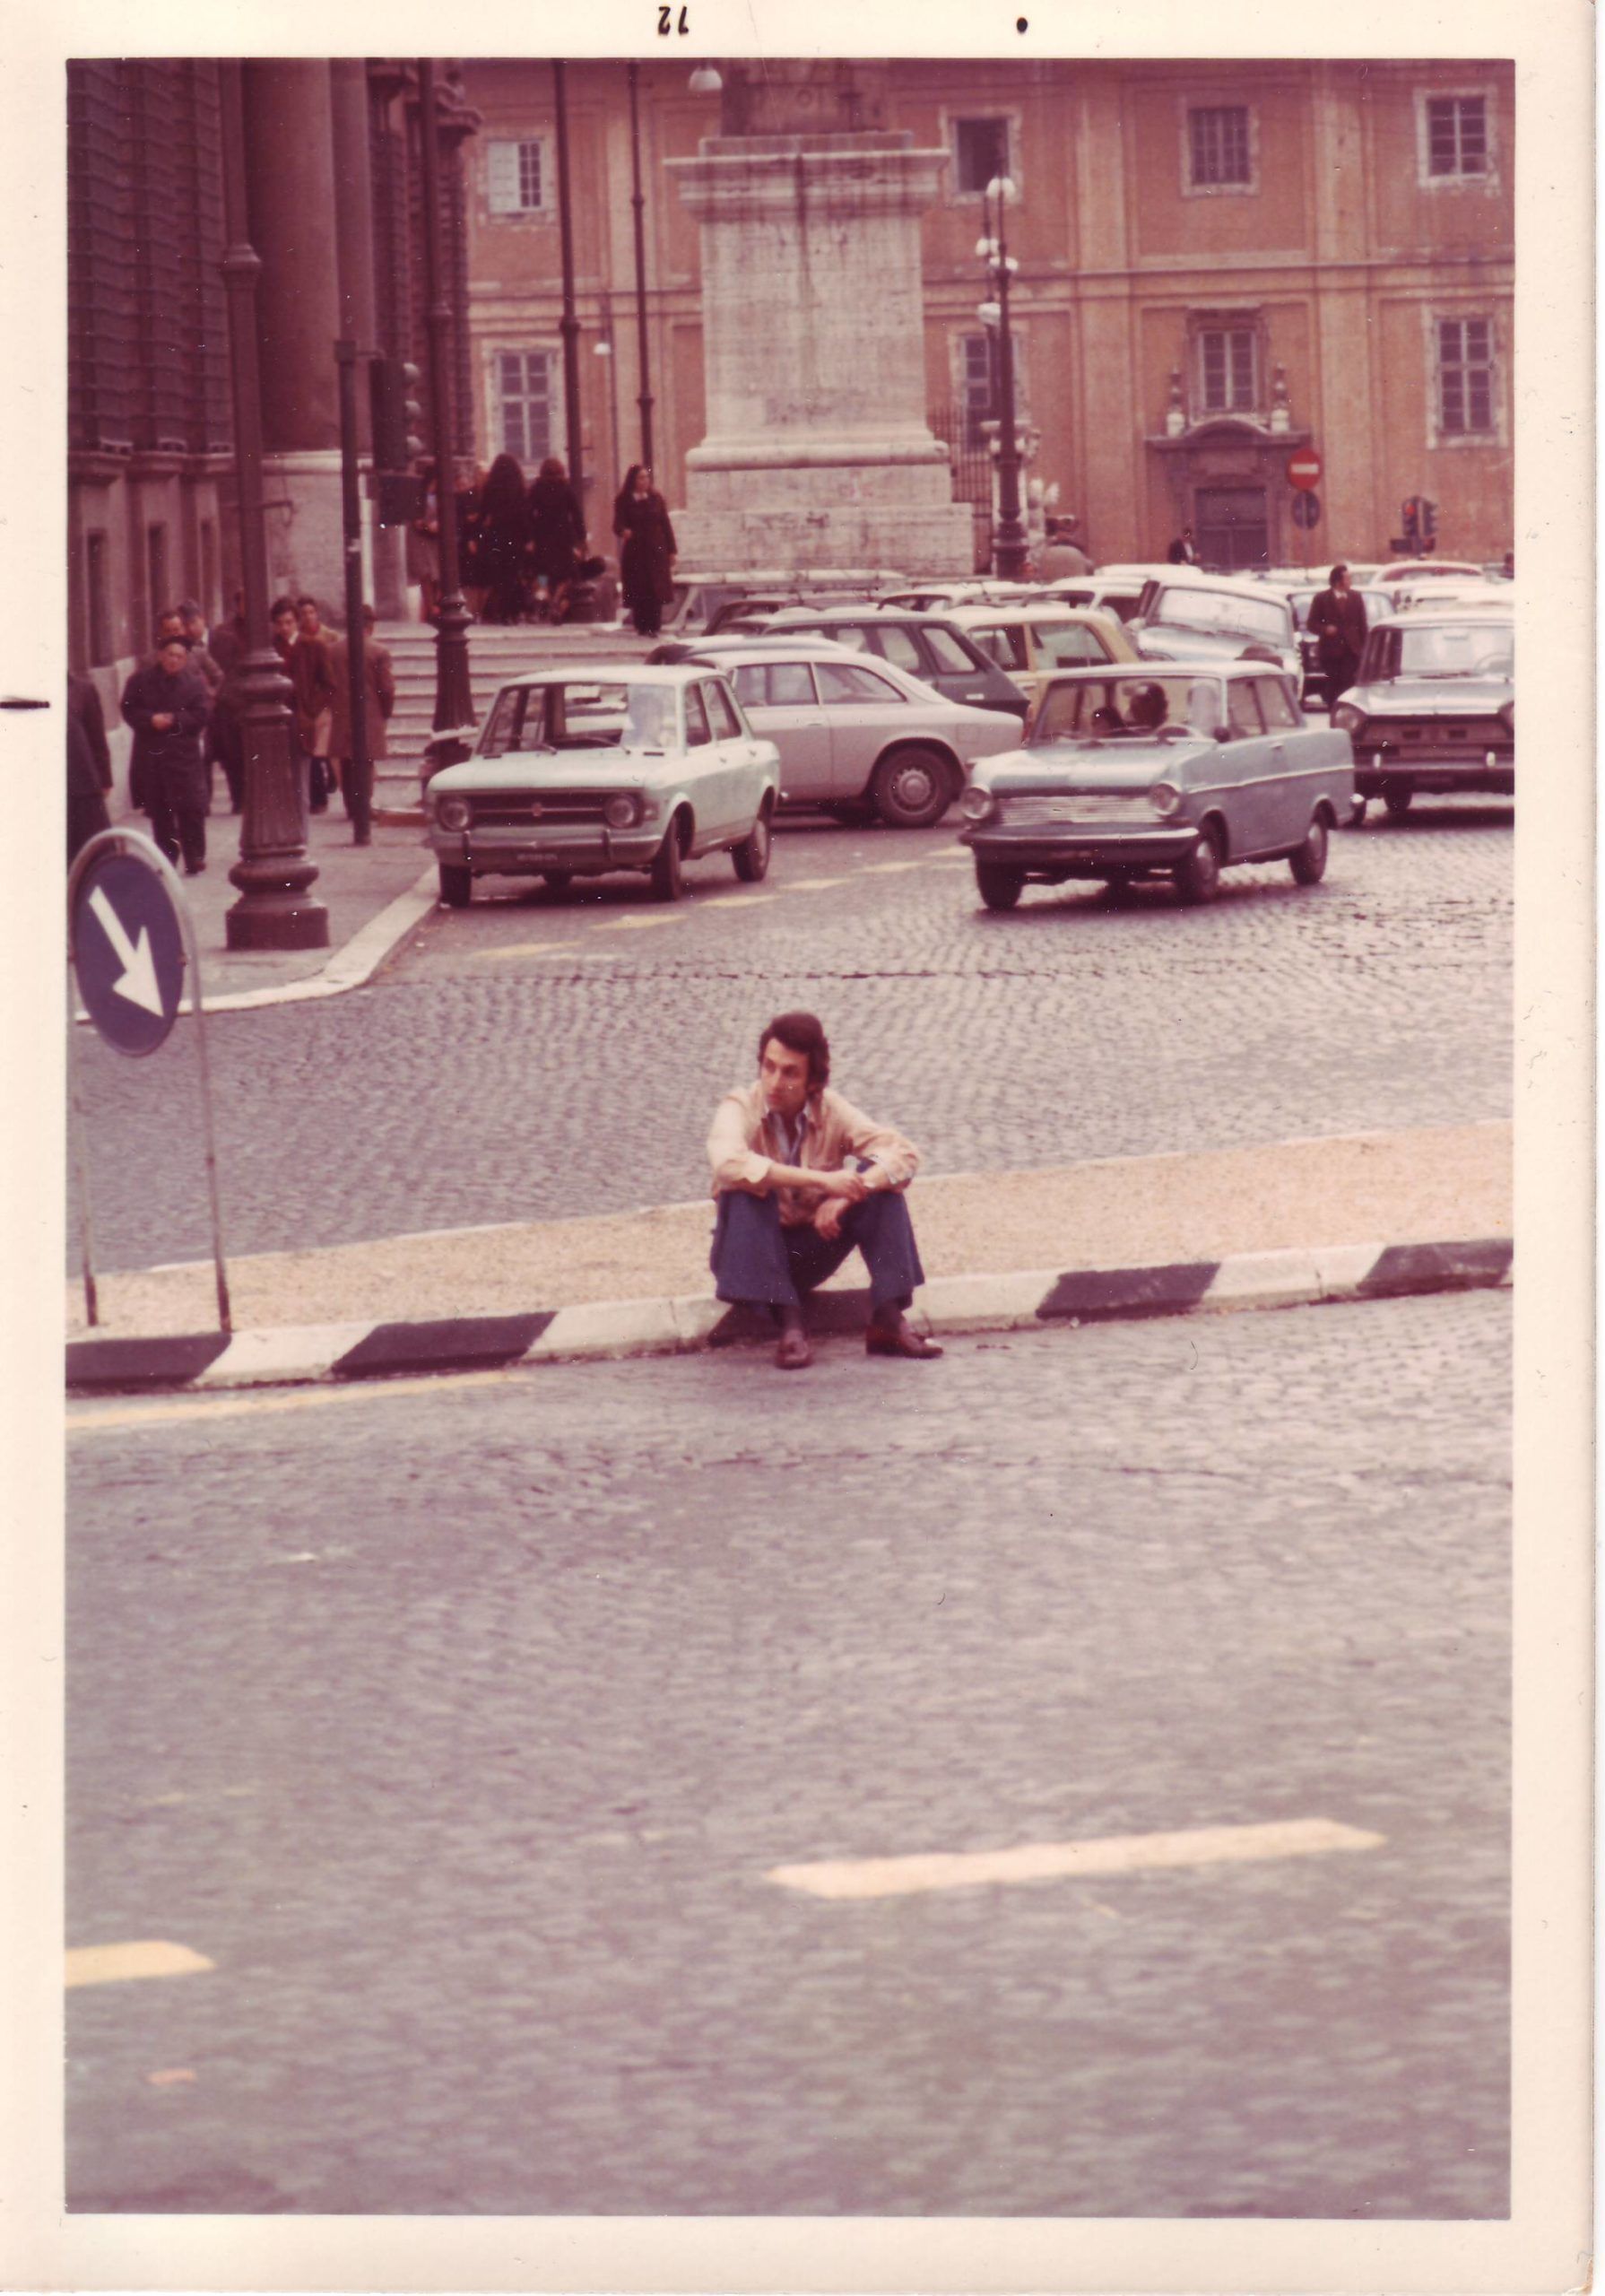 Danny Leksell, sitting on a street in Rome